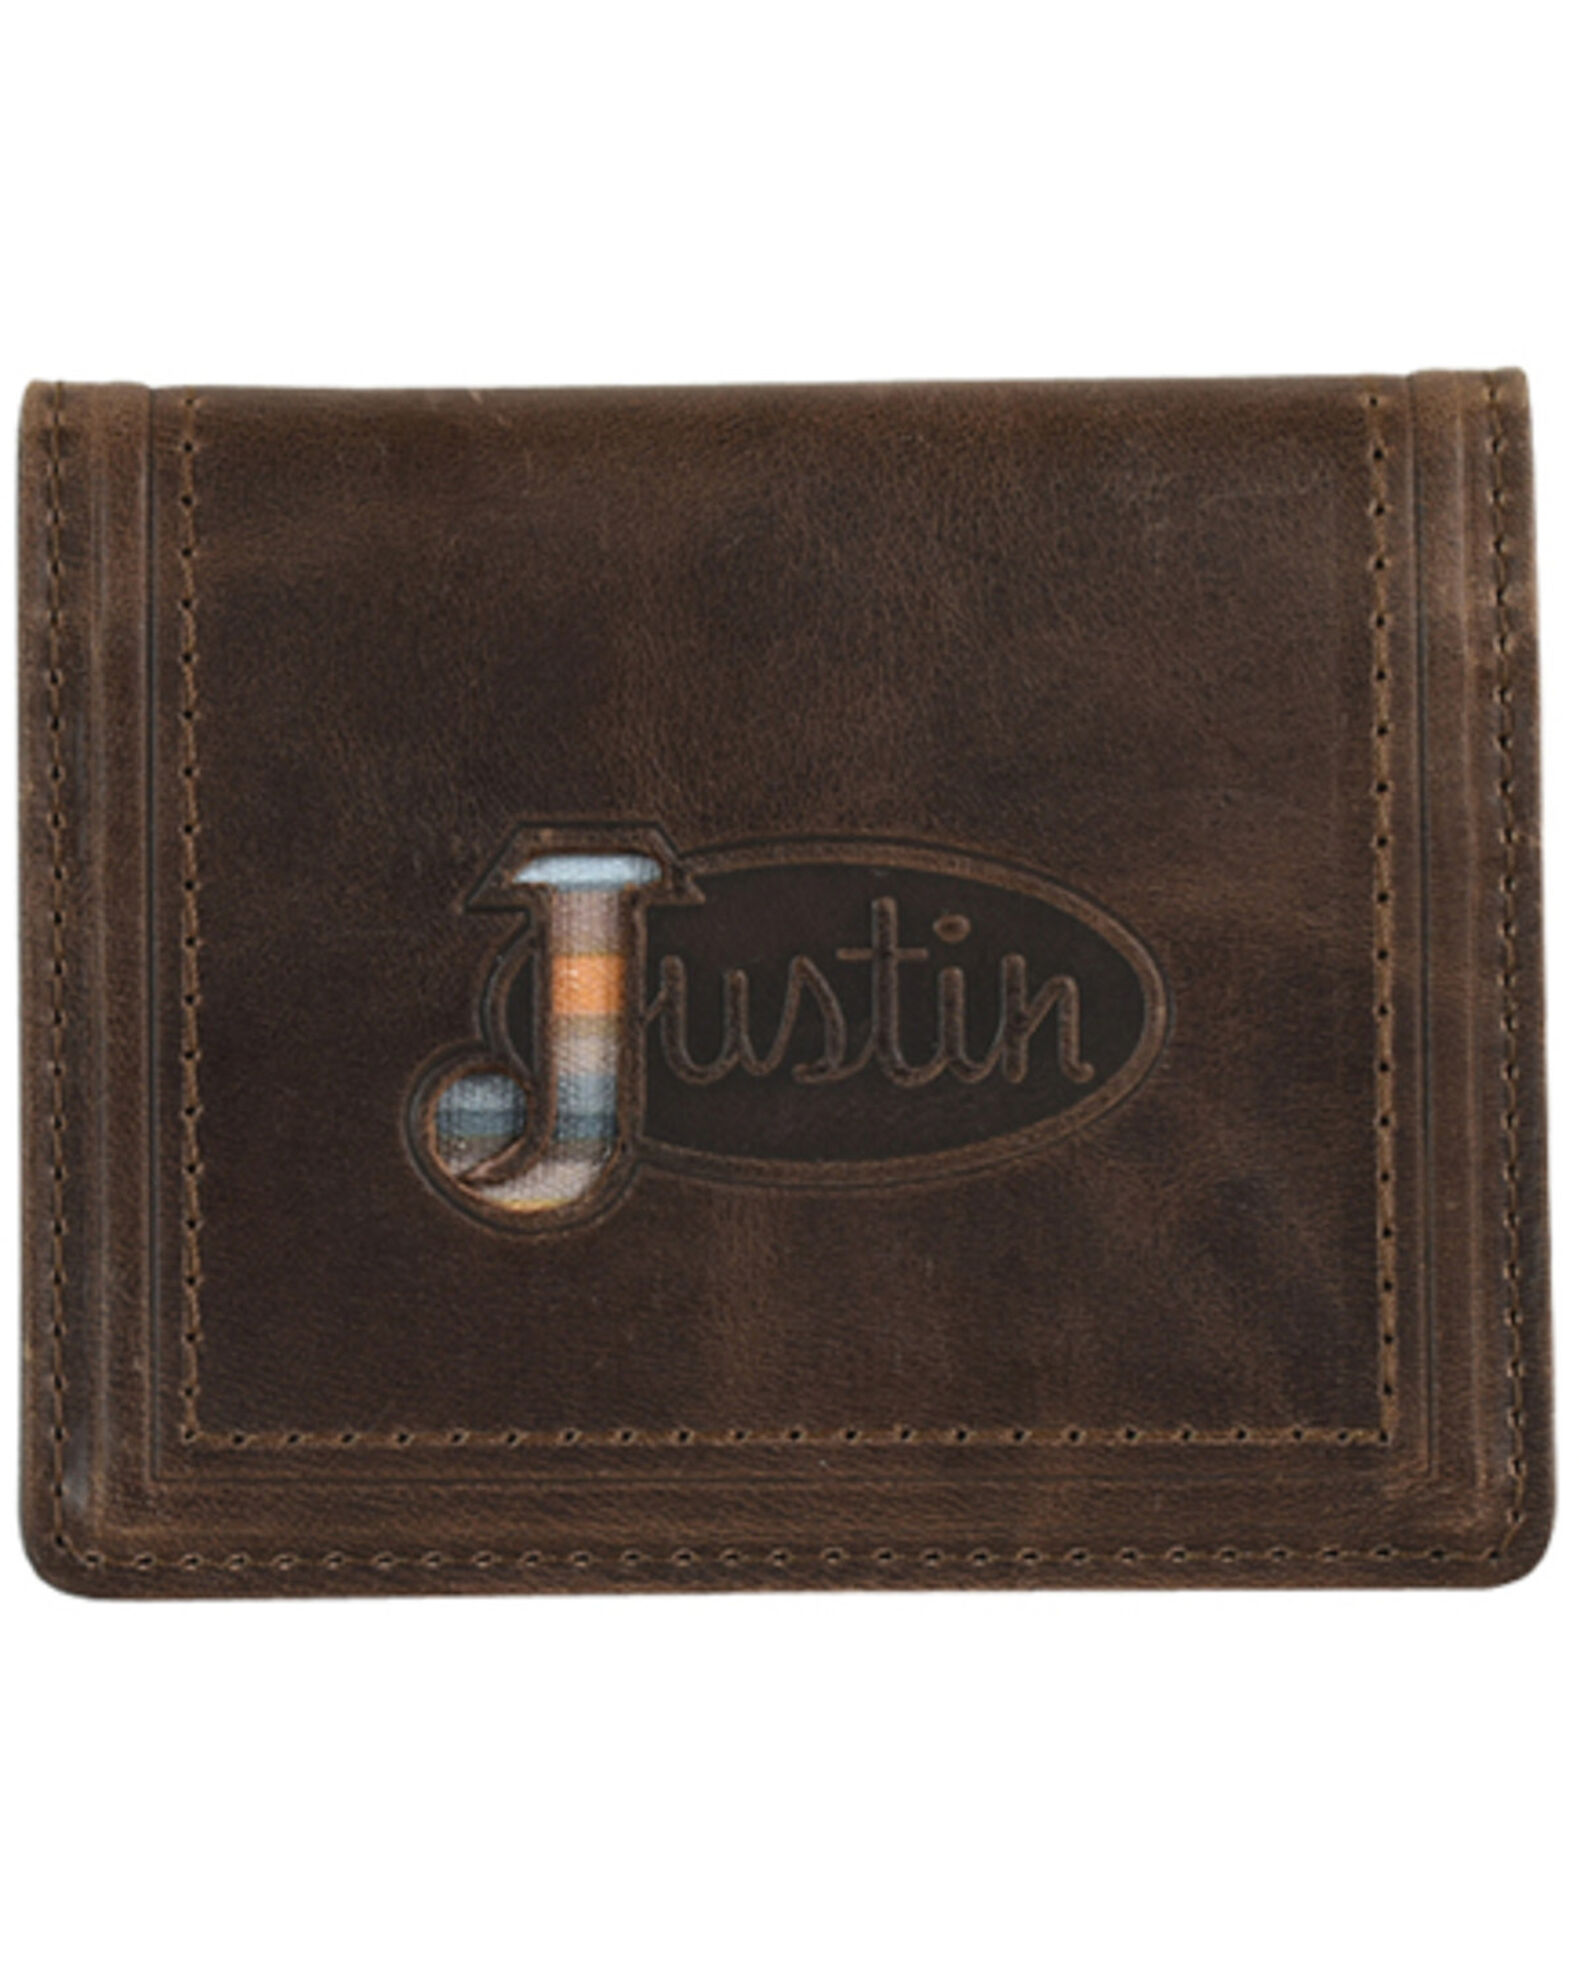 JUSTIN Boots Men's Front Pocket Wallet / BiFold Leather Tooled Dark  Brown NEW